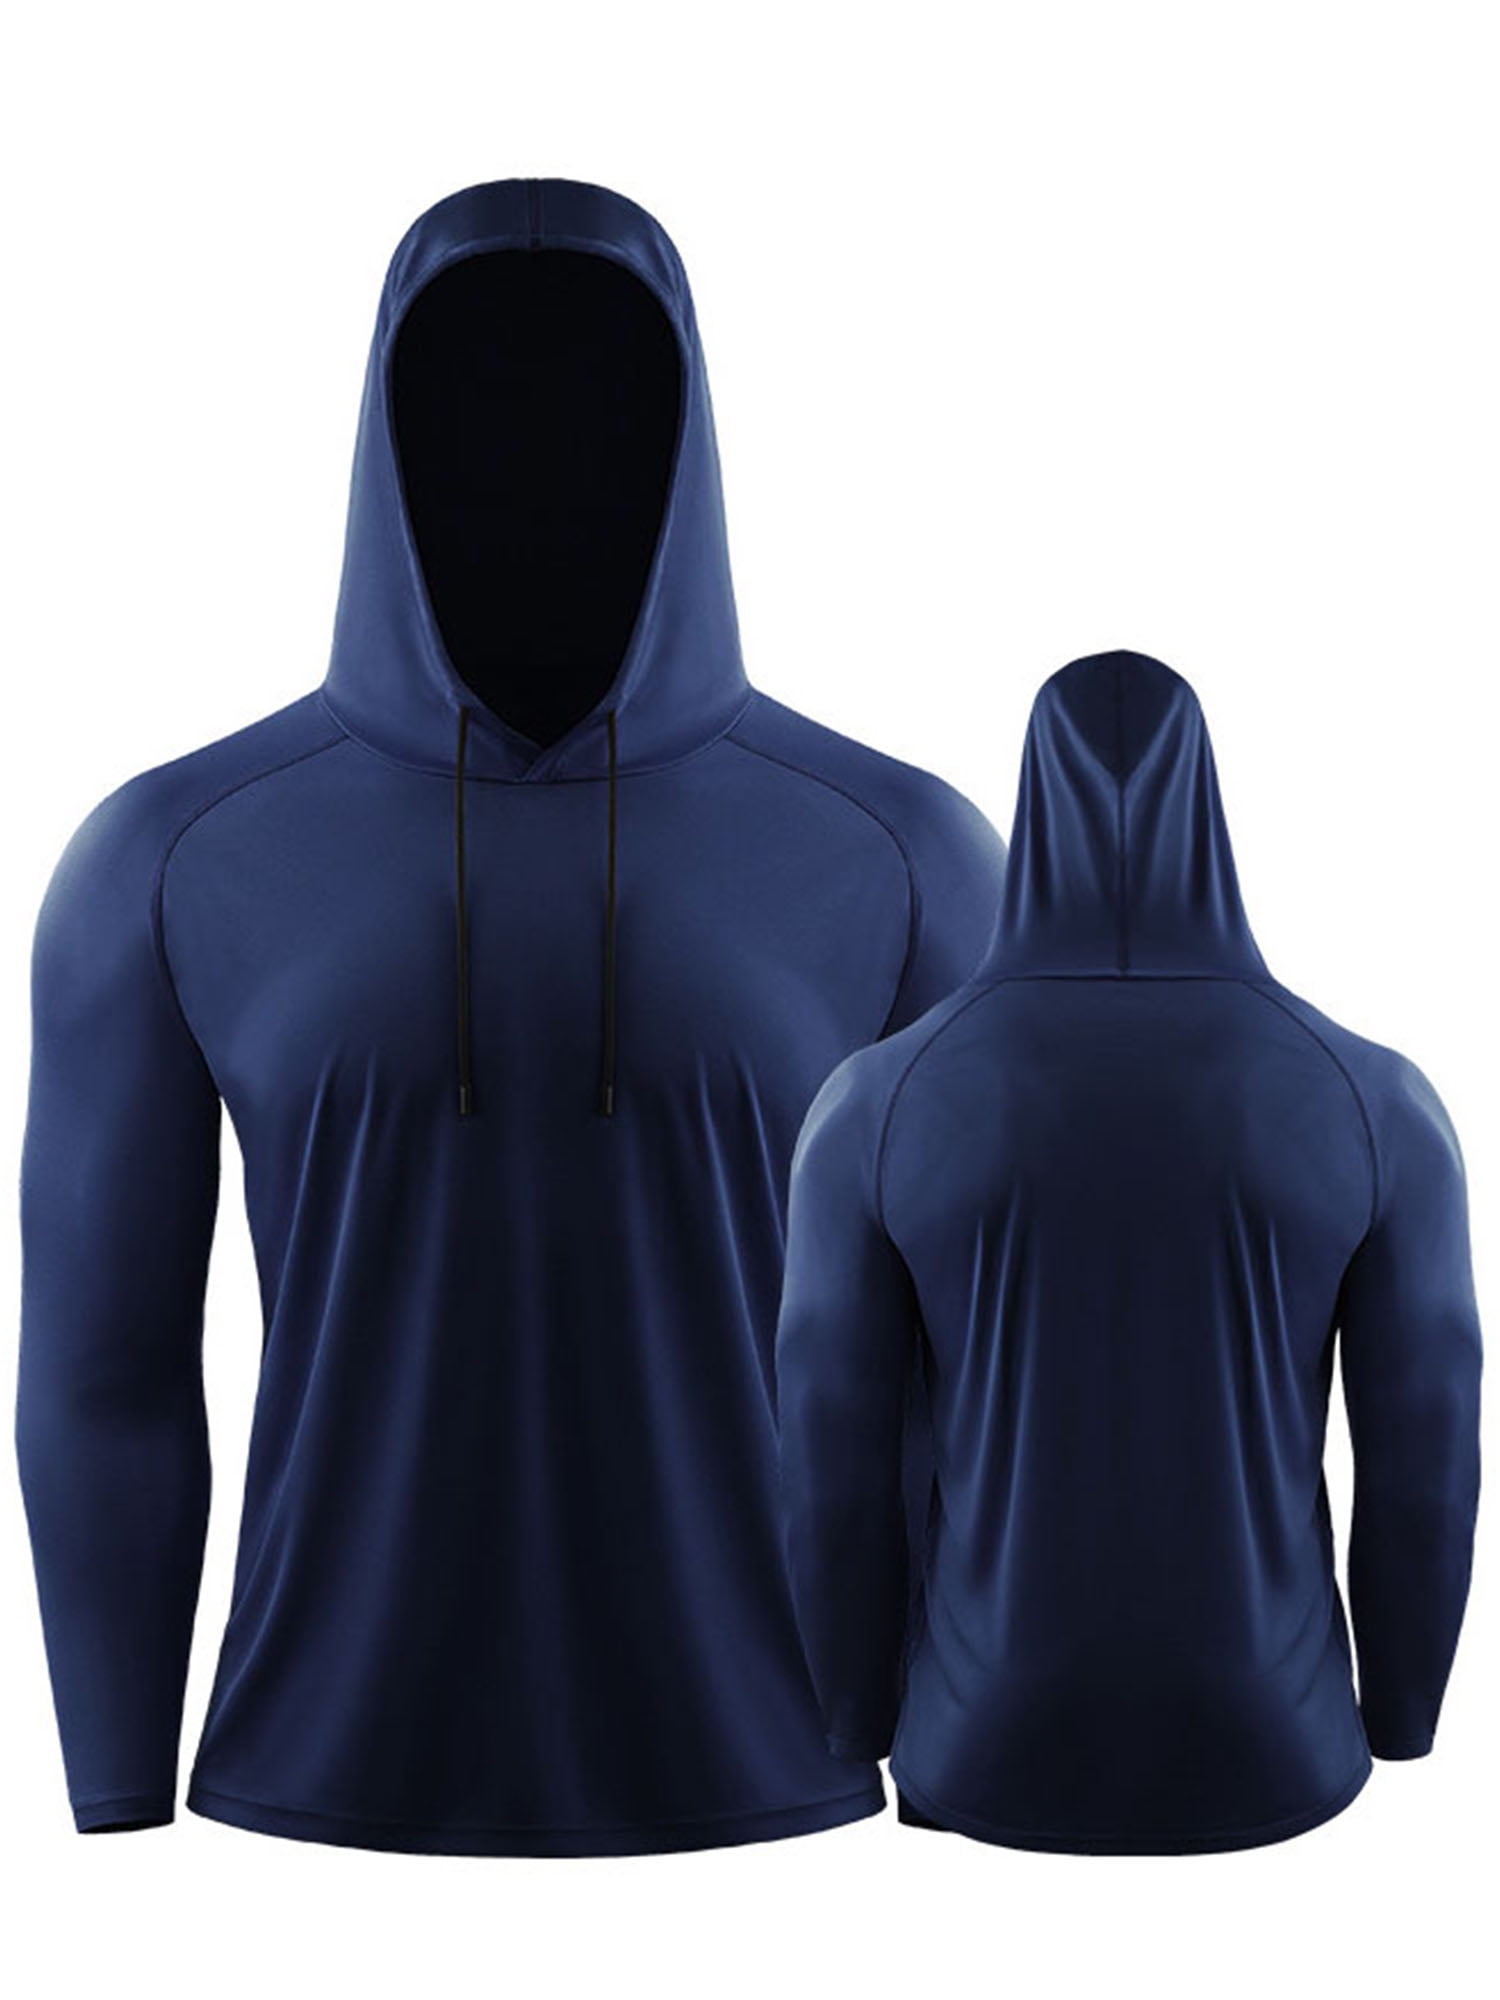 BALEAF Men's Long Sleeve Hooded Shirts Quick Dry Fishing Workout Athletic Hoodie Loose Fit 